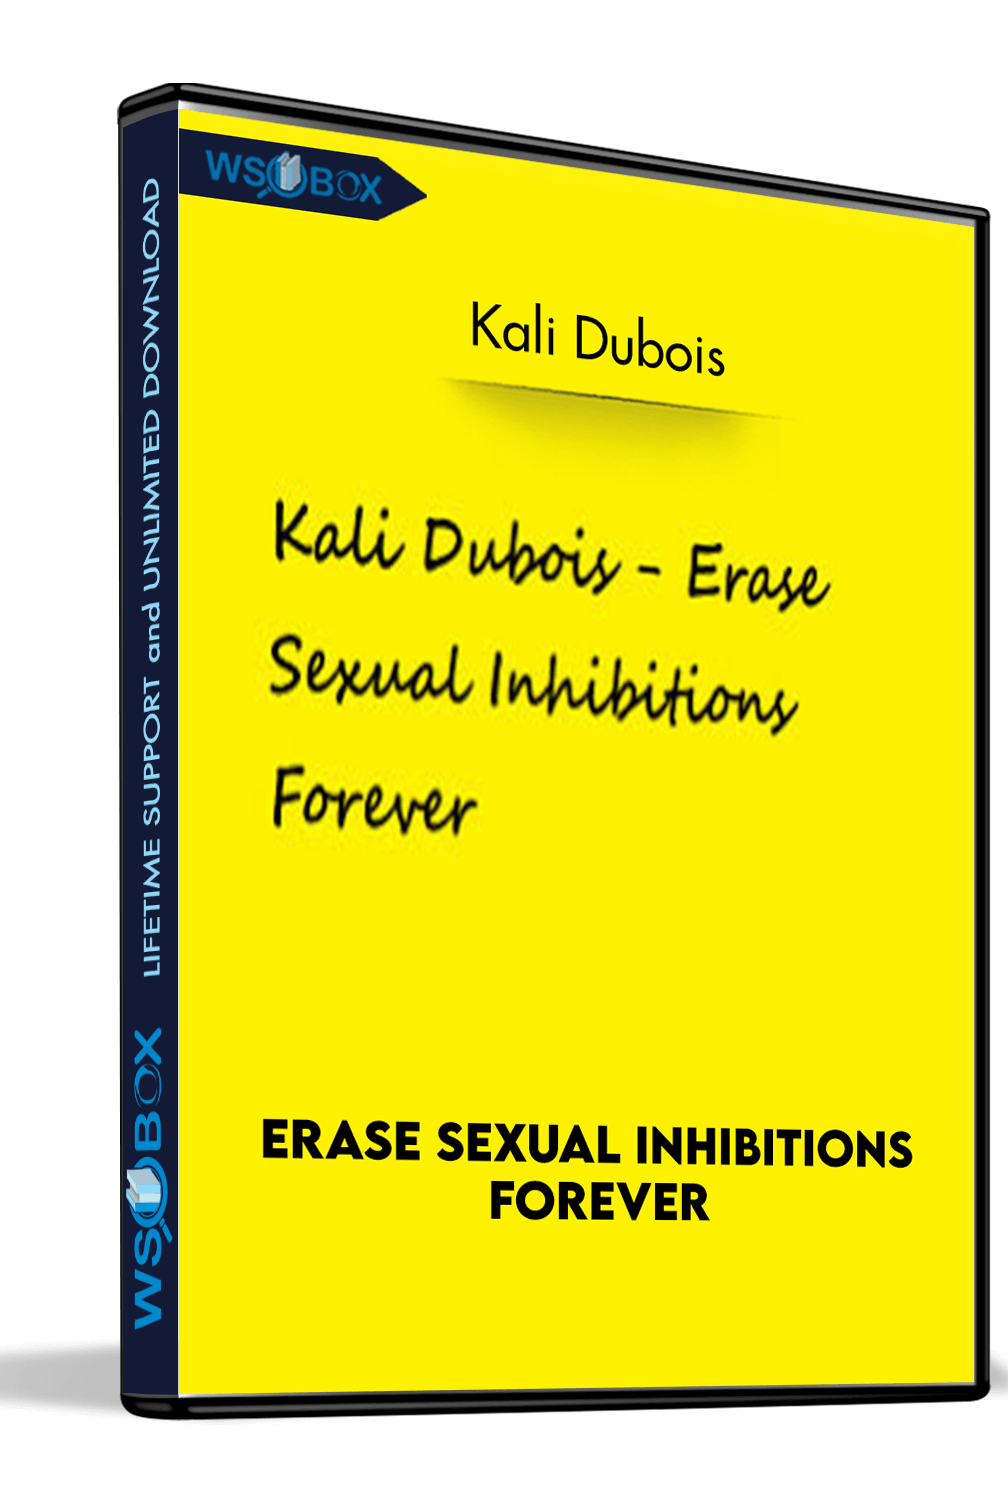 erase-sexual-inhibitions-forever-kali-dubois